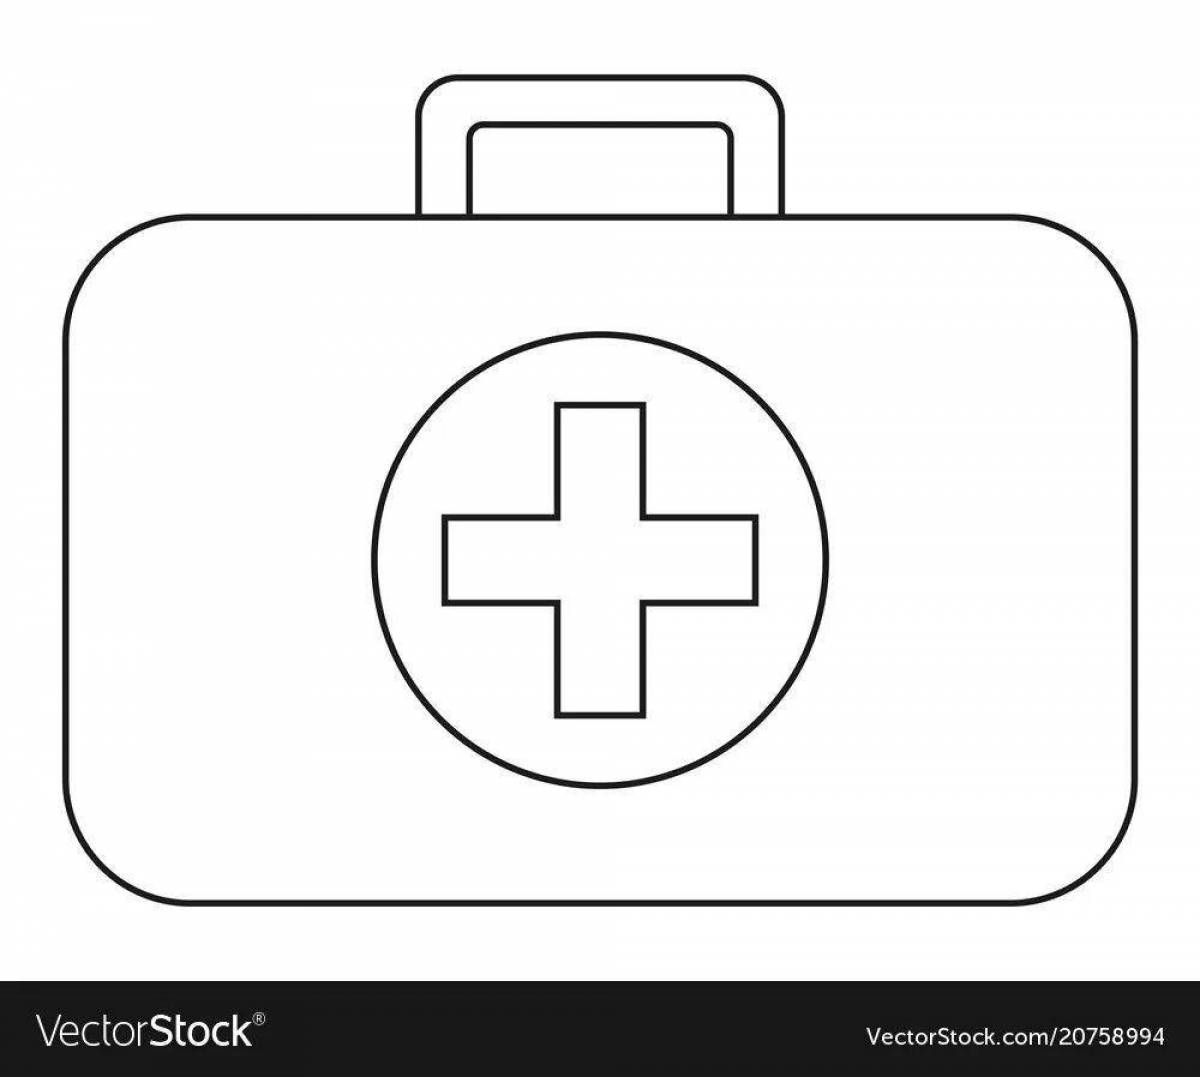 Coloring page lovely red cross